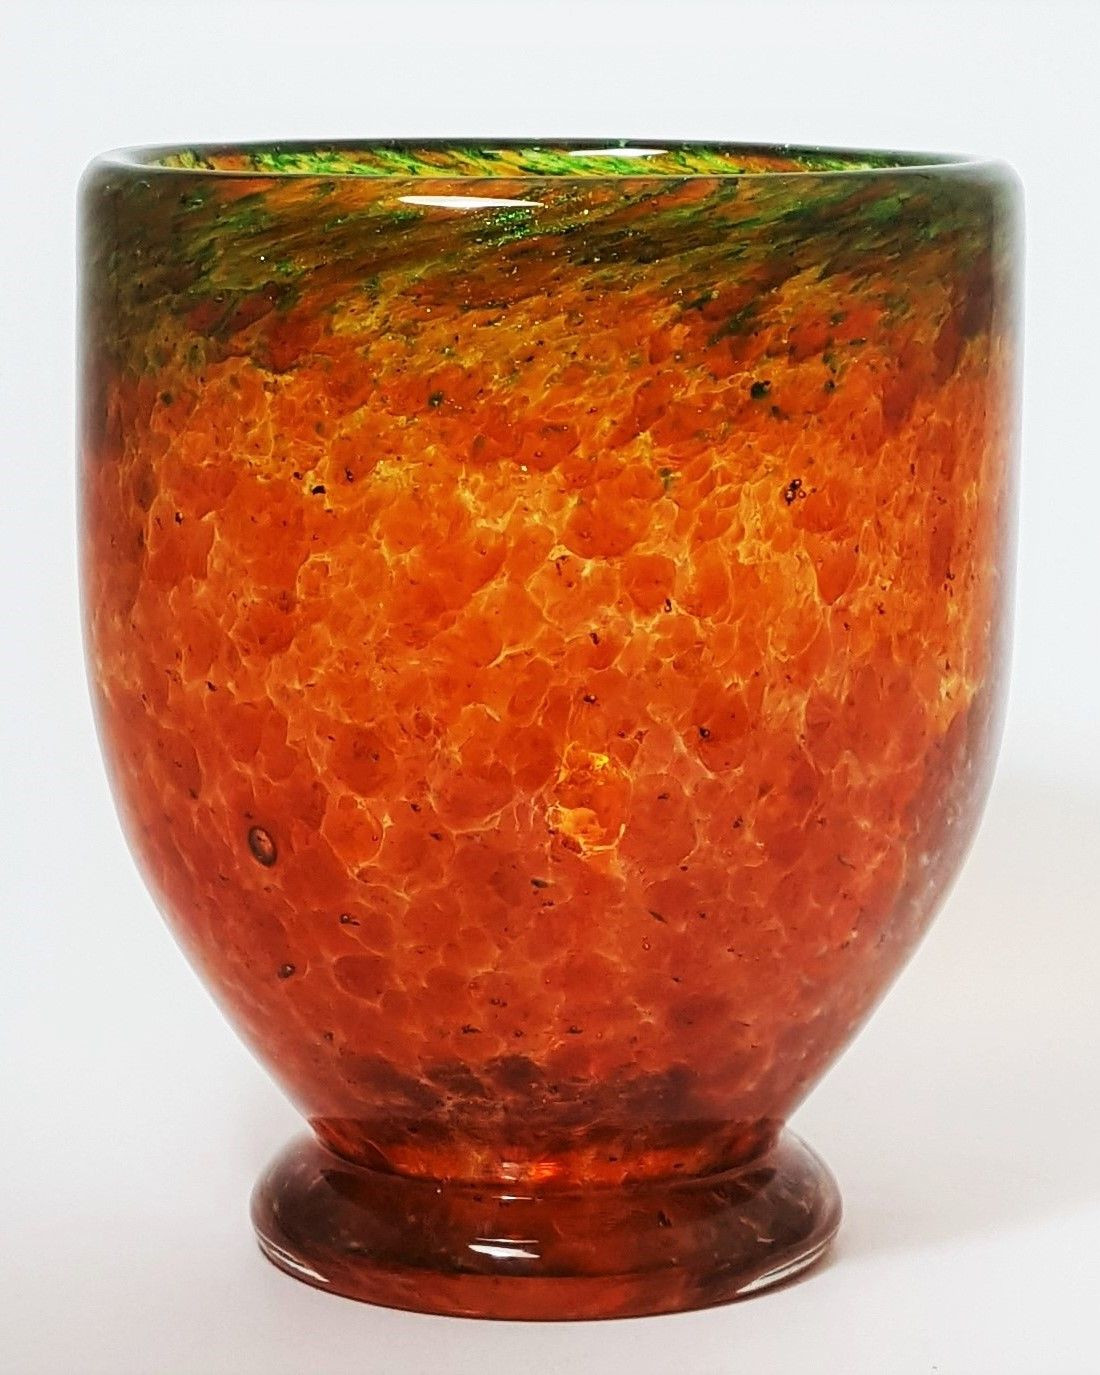 23 Lovely Footed Crystal Vase 2024 free download footed crystal vase of monart glass footed art vase with aventurine c1930 glass inside monart glass footed art vase with aventurine c1930